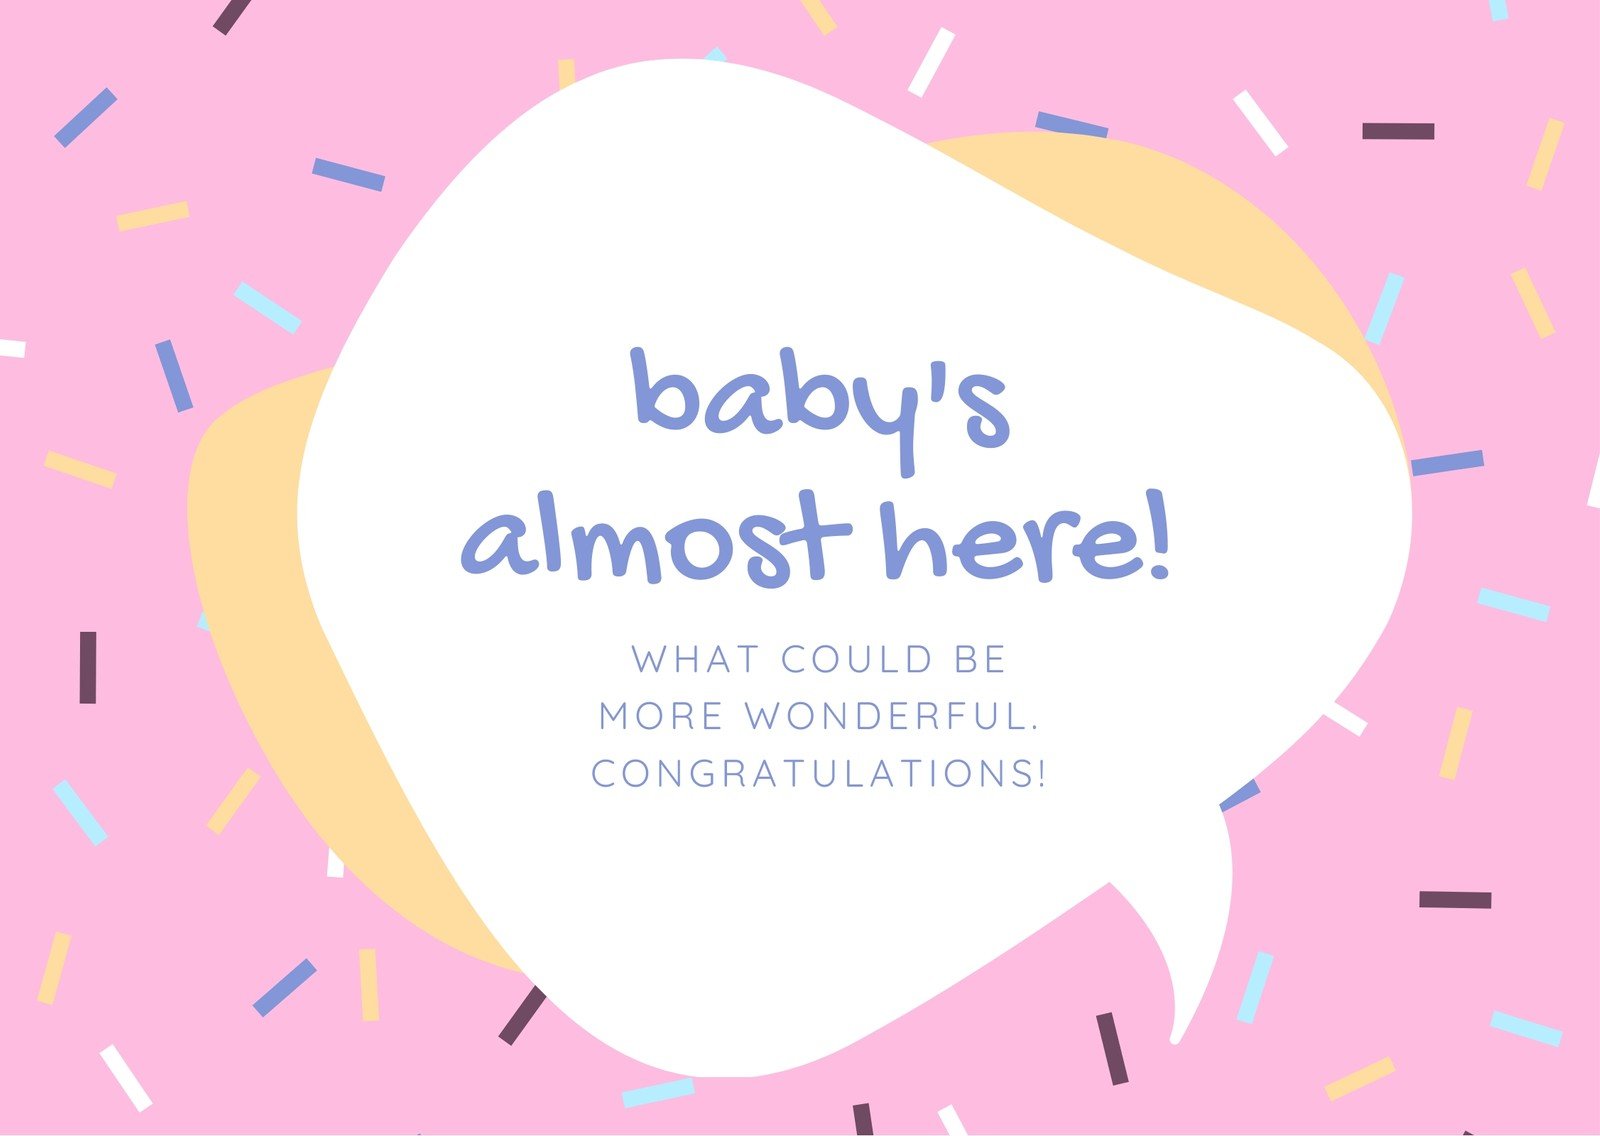 a-miracle-came-into-your-life-new-baby-boy-card-baby-congratulations